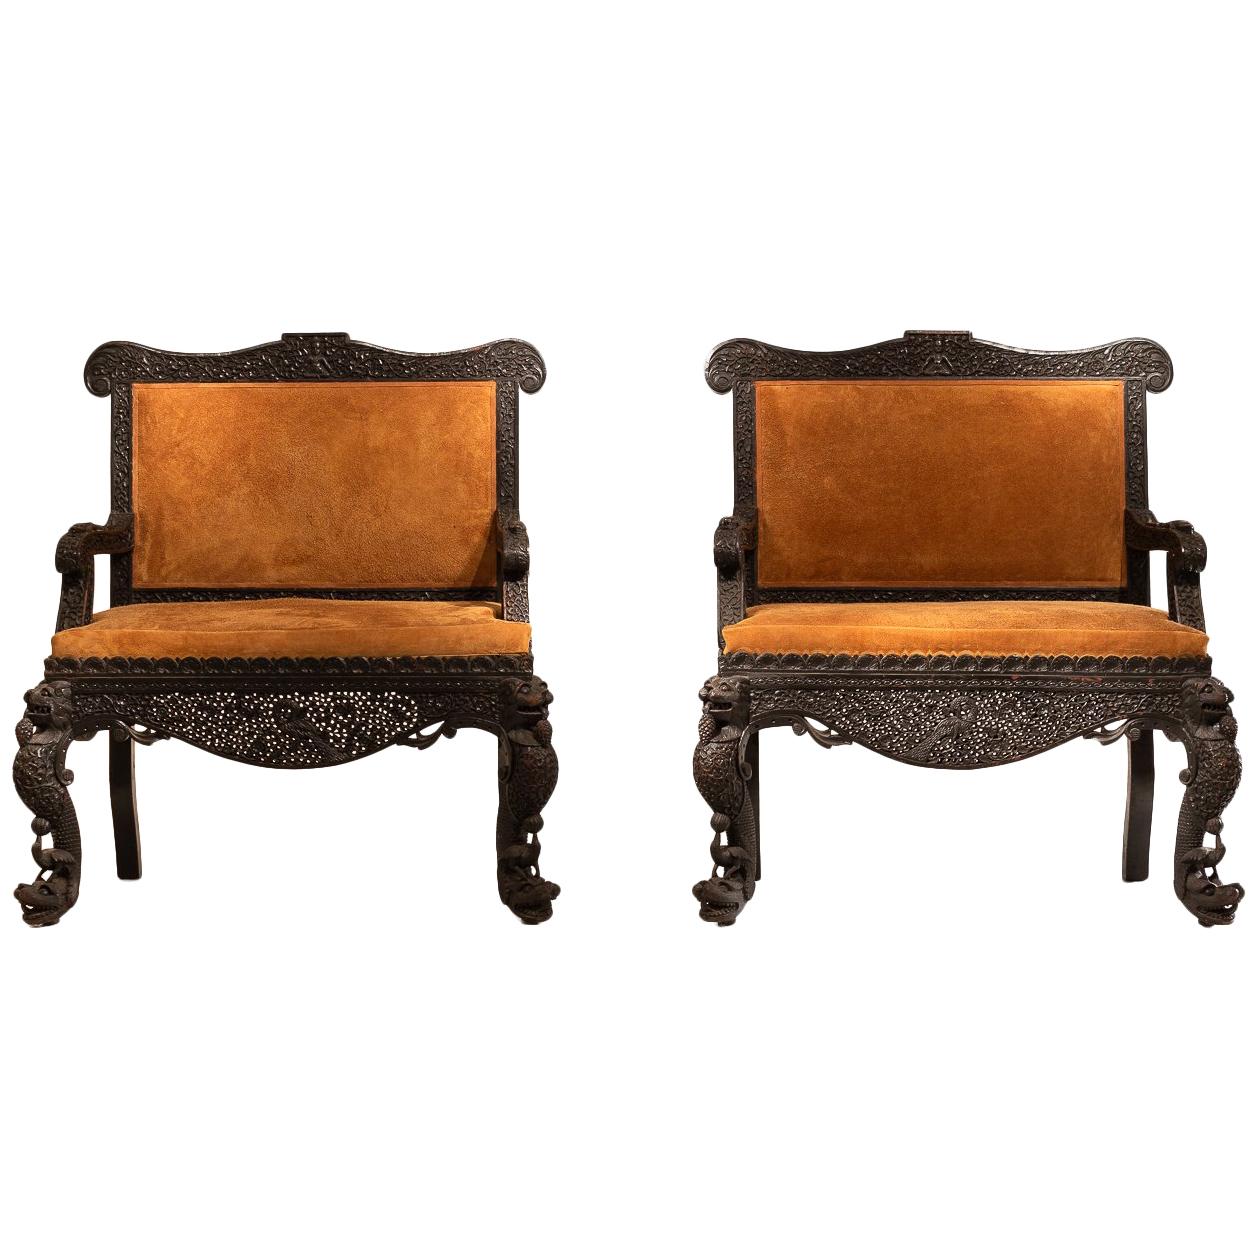 19th Century Carved Hardwood Pair of Anglo Indian Sofas in Suede For Sale